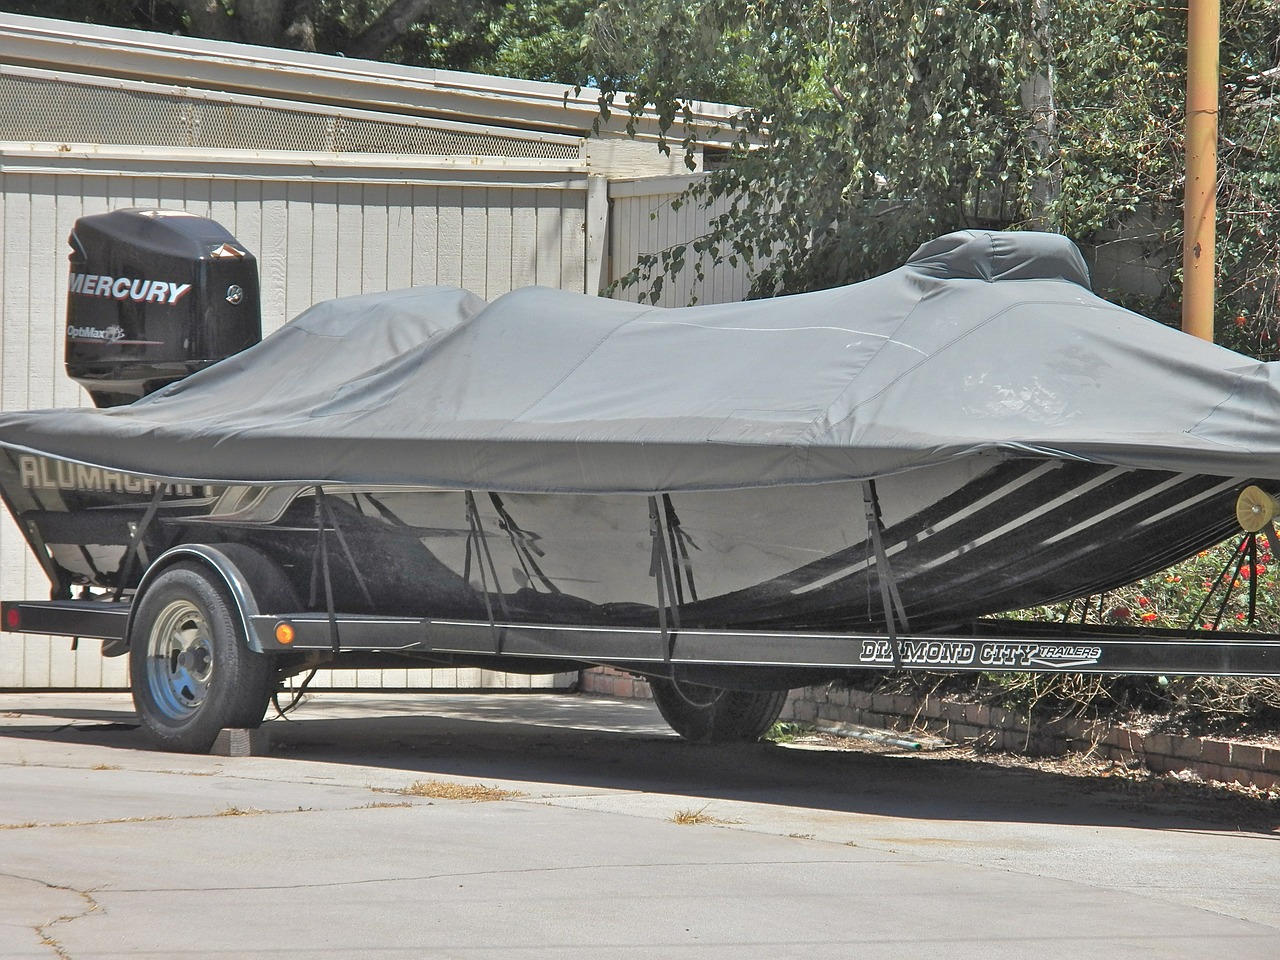 Tips For Trailering Your Boat